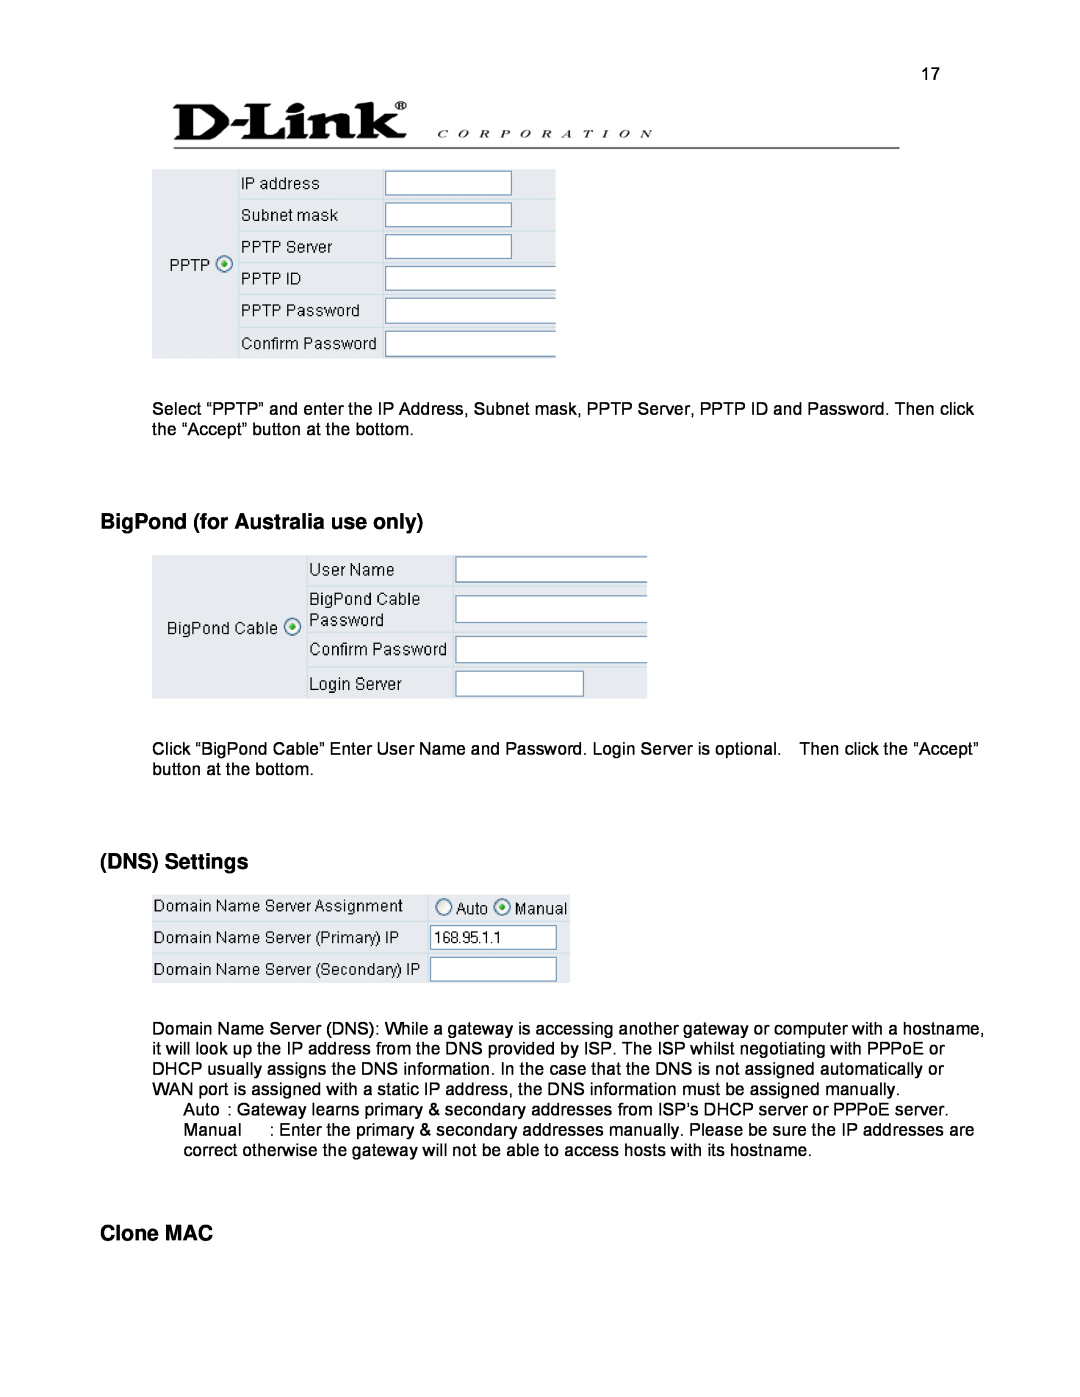 D-Link DVG-2032S user manual BigPond for Australia use only, DNS Settings, Clone MAC 